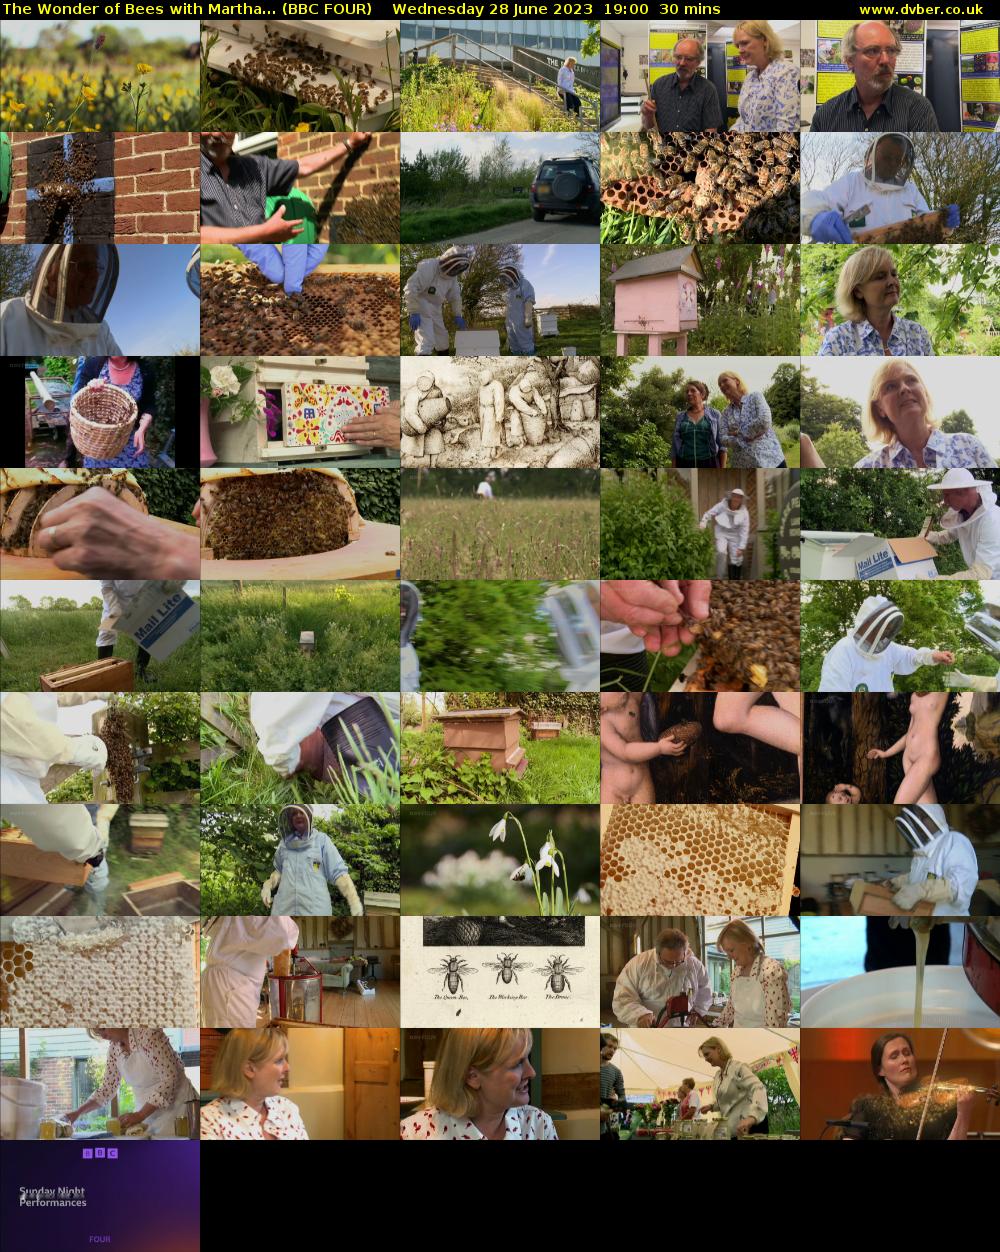 The Wonder of Bees with Martha... (BBC FOUR) Wednesday 28 June 2023 19:00 - 19:30